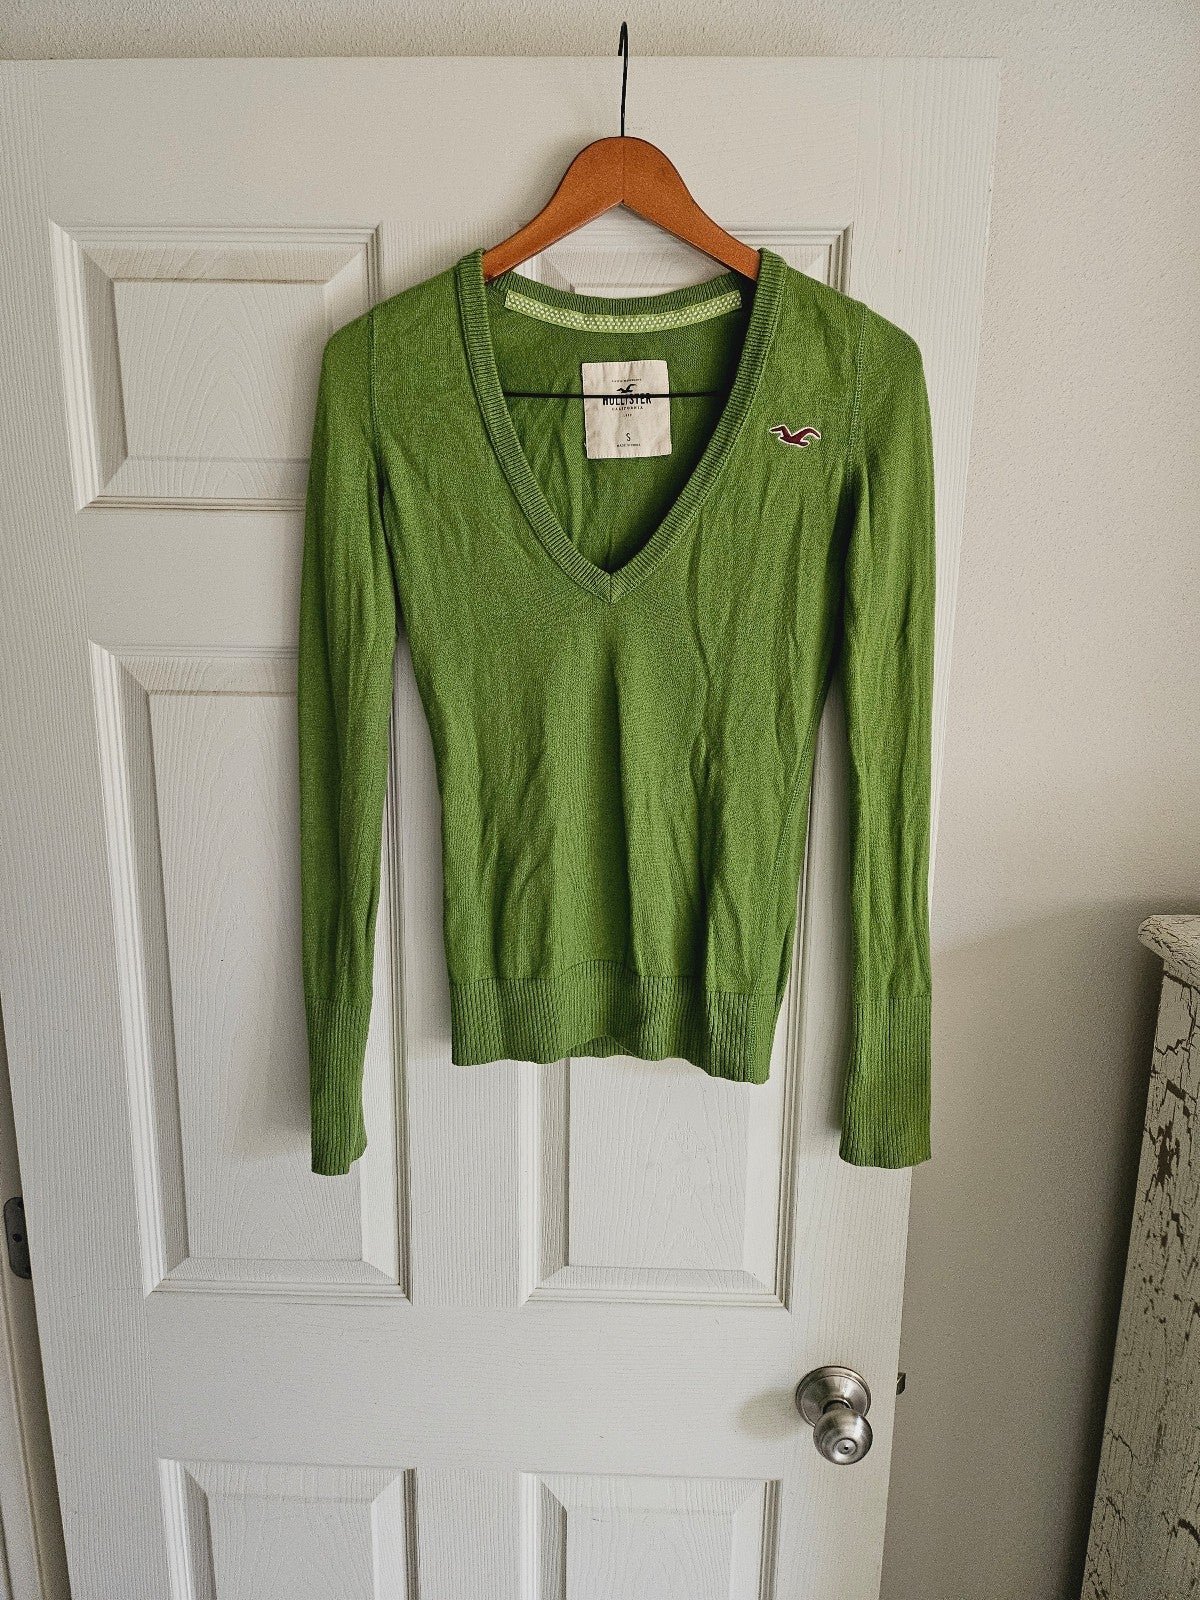 Fashion Hollister S V Neck Sweater Green Good Used Cond